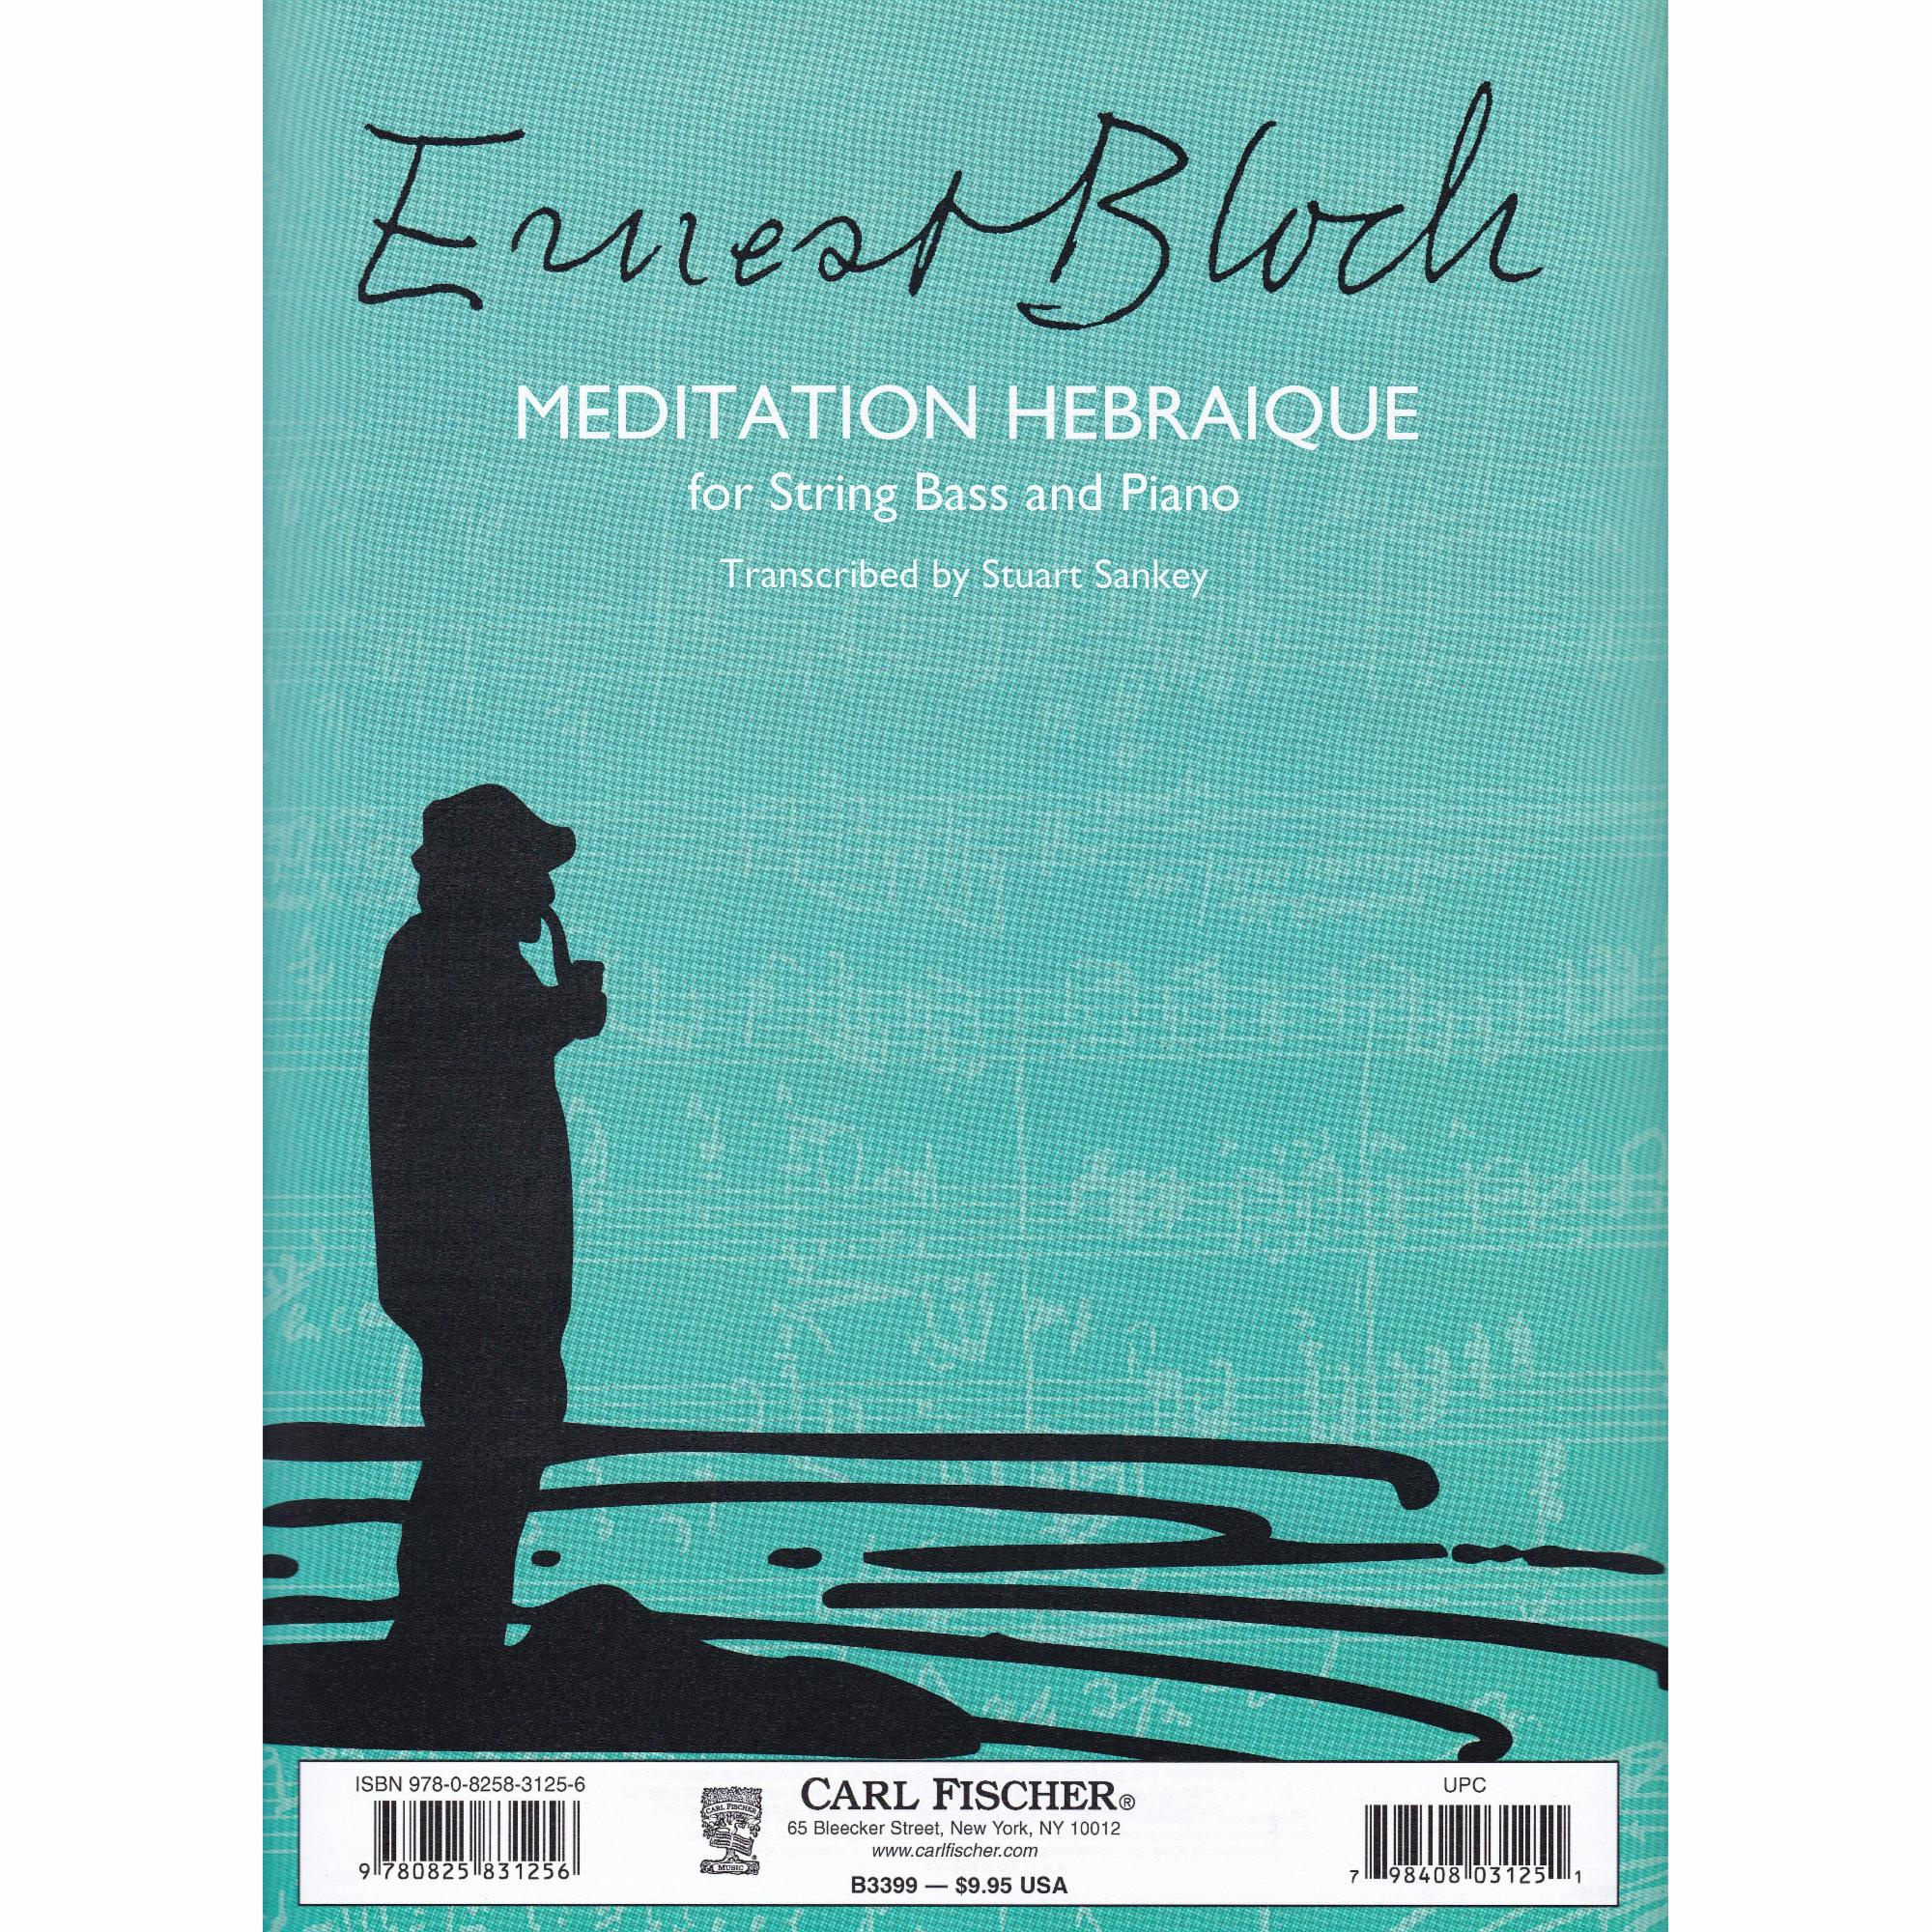 Meditation Hebraique for Bass and Piano